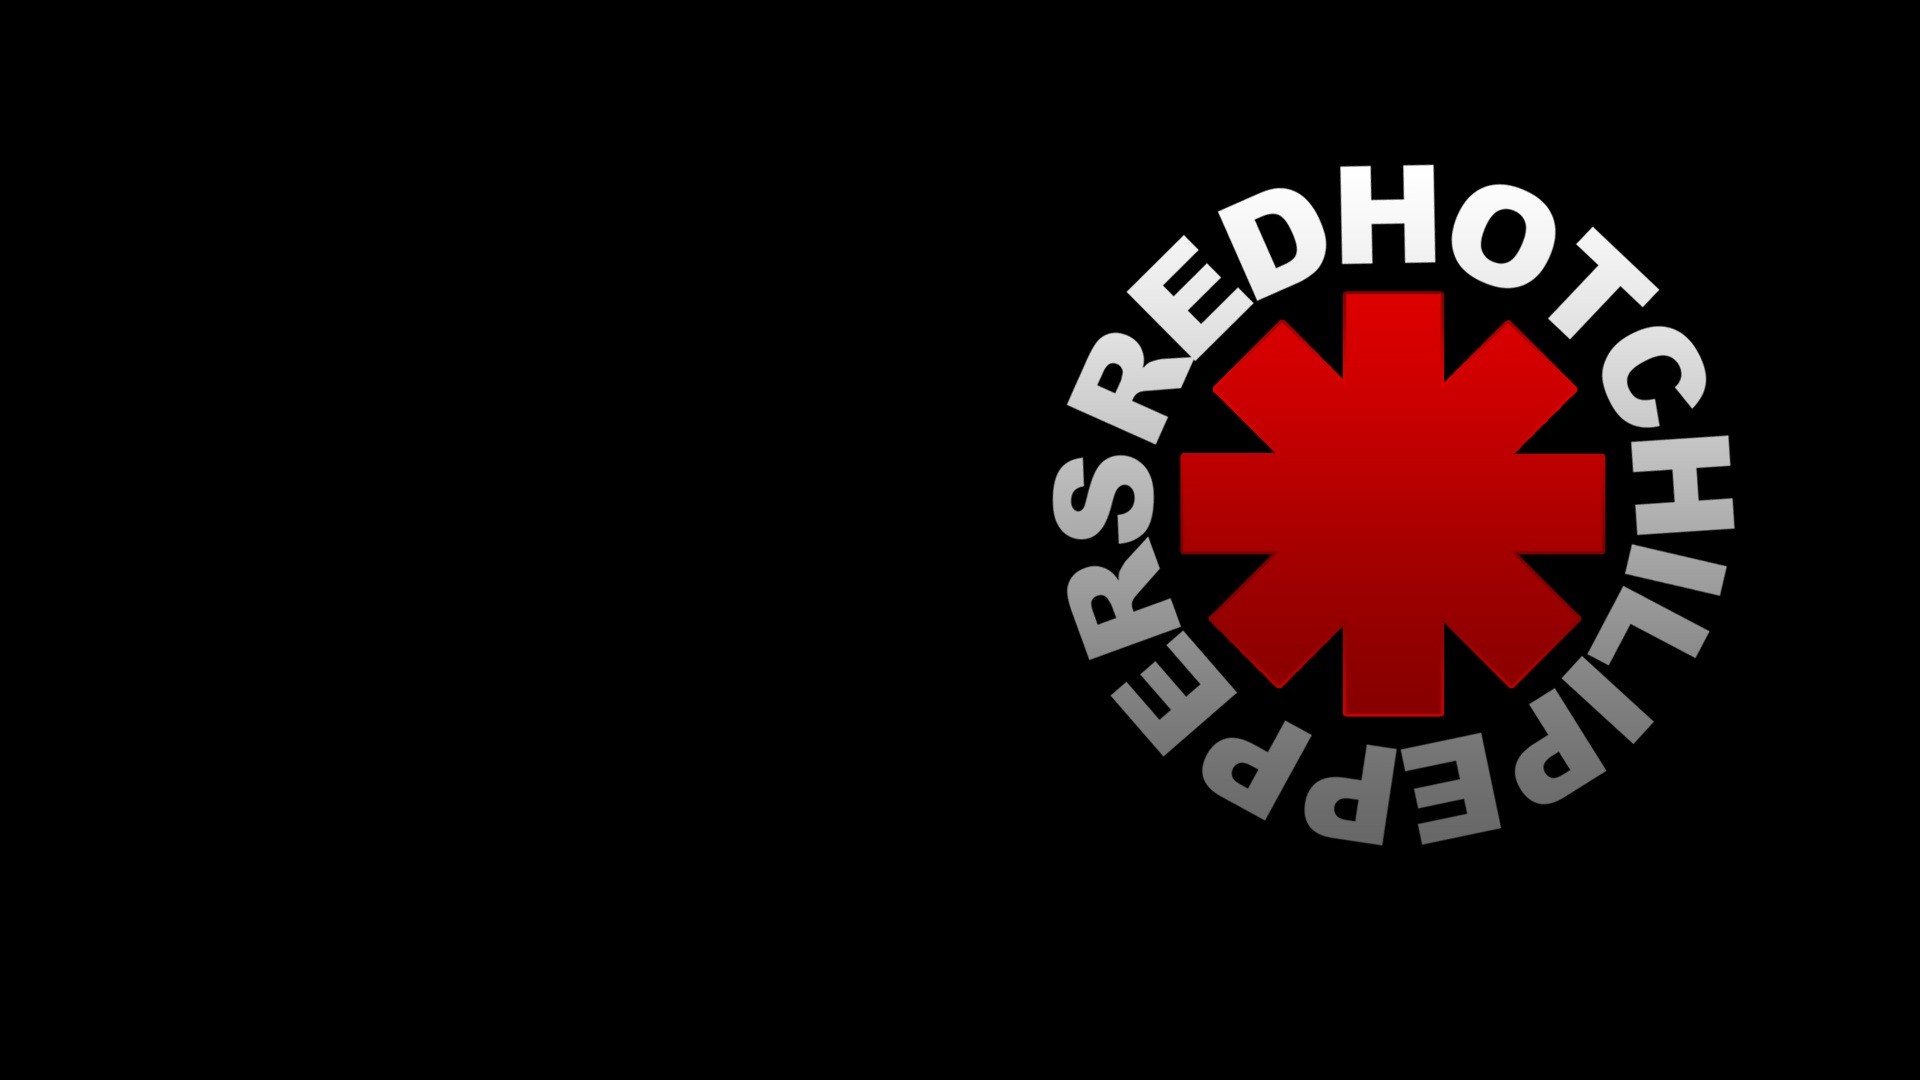 General 1920x1080 Red Hot Chili Peppers music simple background band logo red